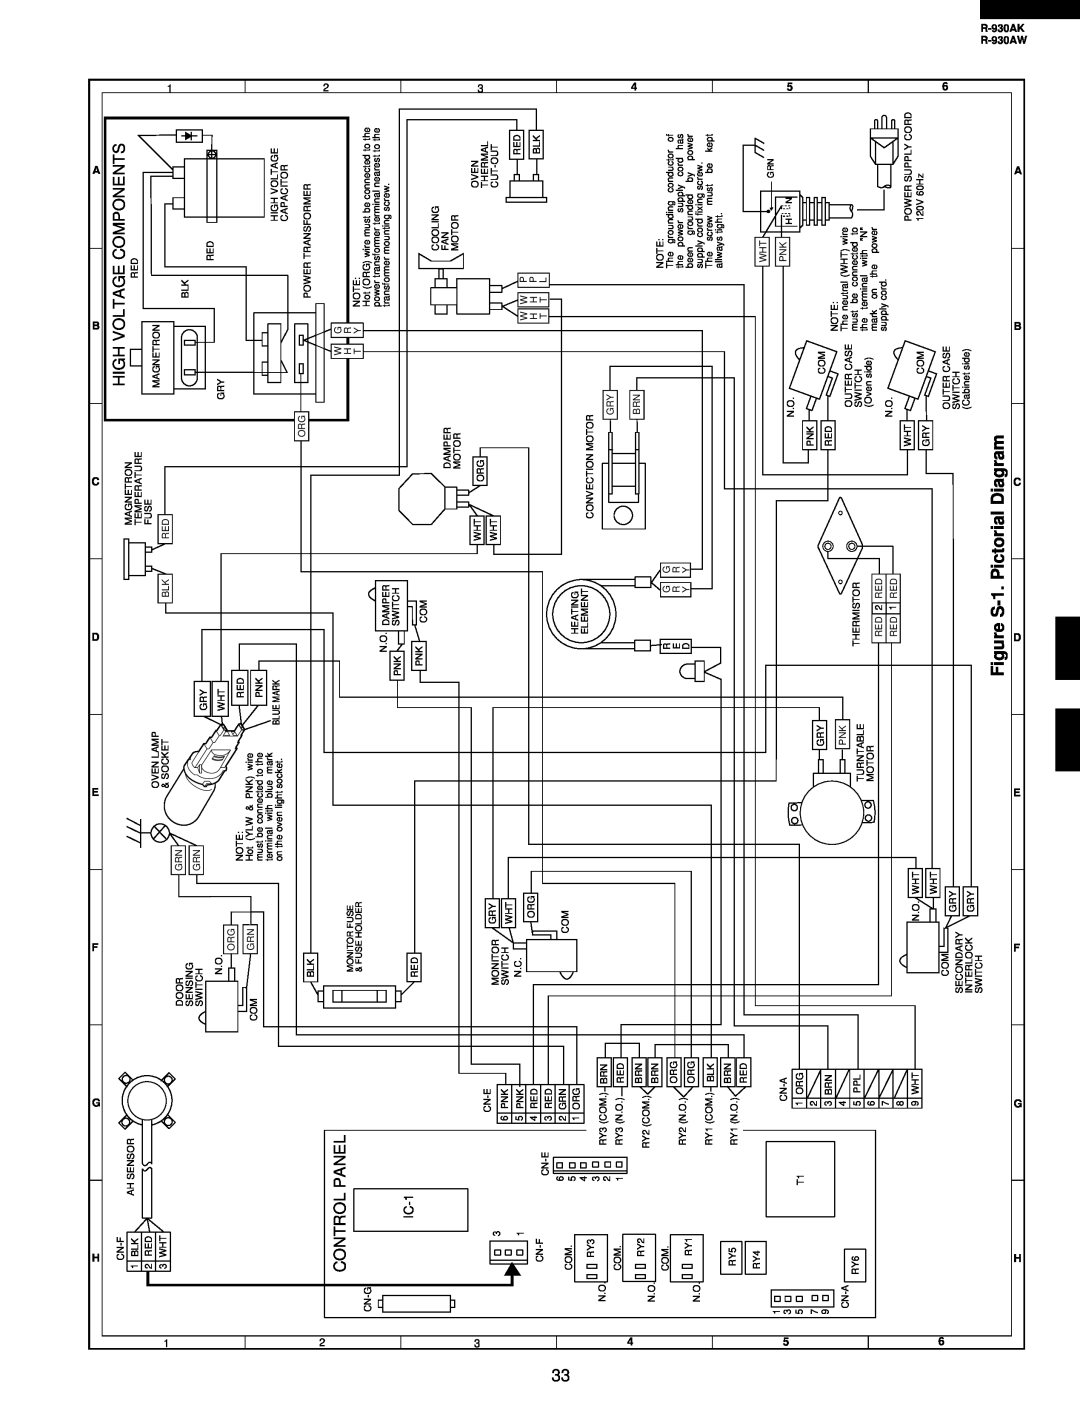 Sharp R-930AW service manual Figure S-1. Pictorial Diagram, High Voltage Components, Control Panel 